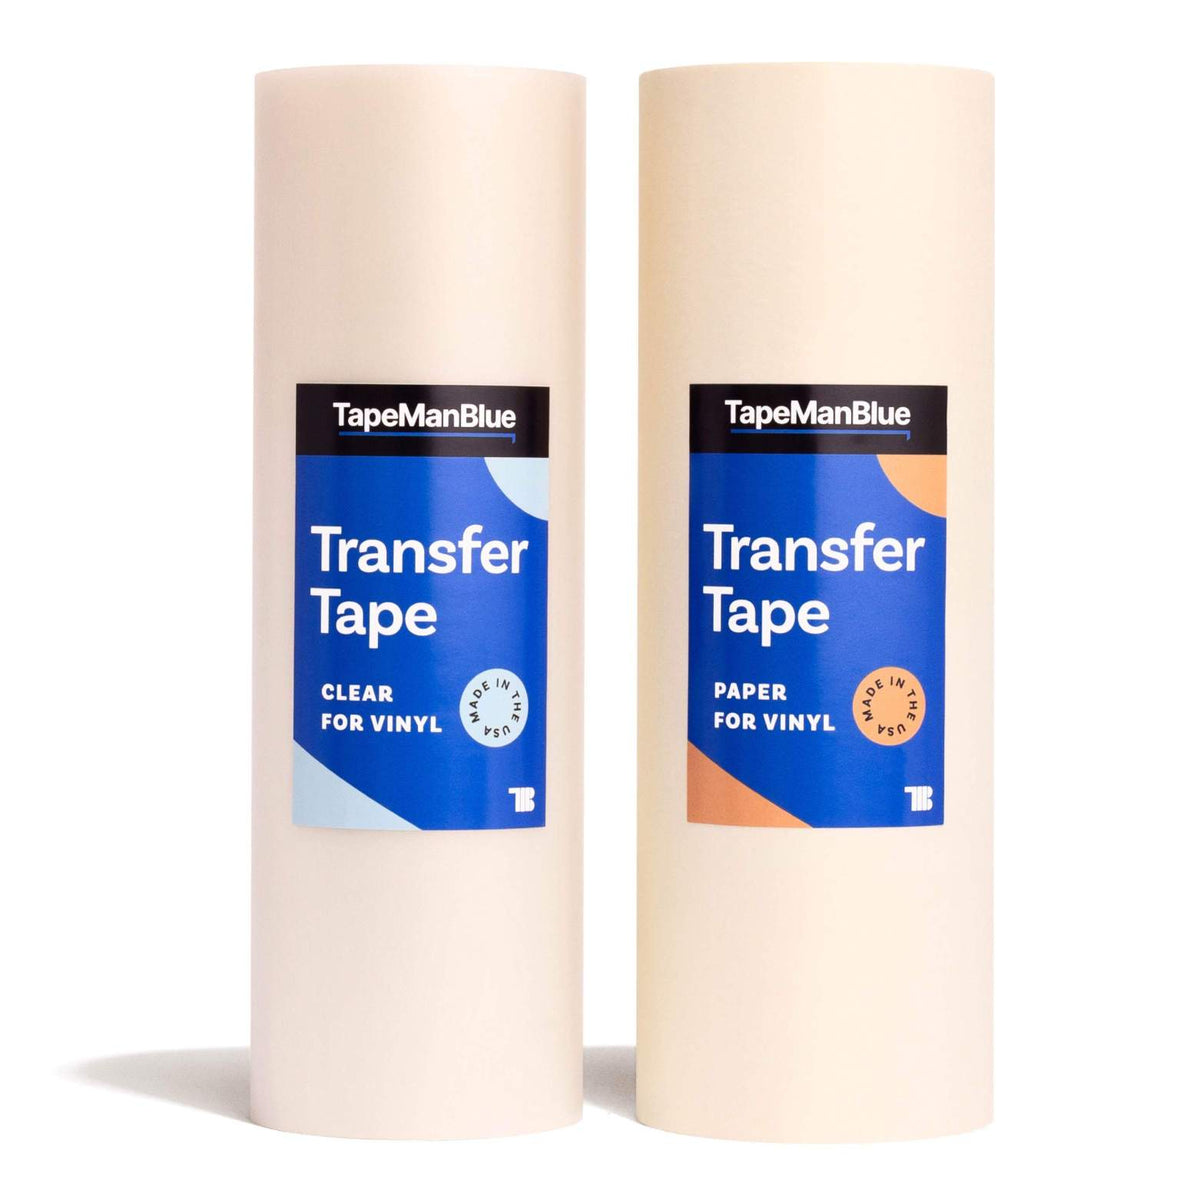 Transfer Tape for Vinyl, 6 inch x 300 feet, Paper with Medium-High Tack  Layflat Adhesive. American-Made Application Tape for Cutters and Sign  Makers 